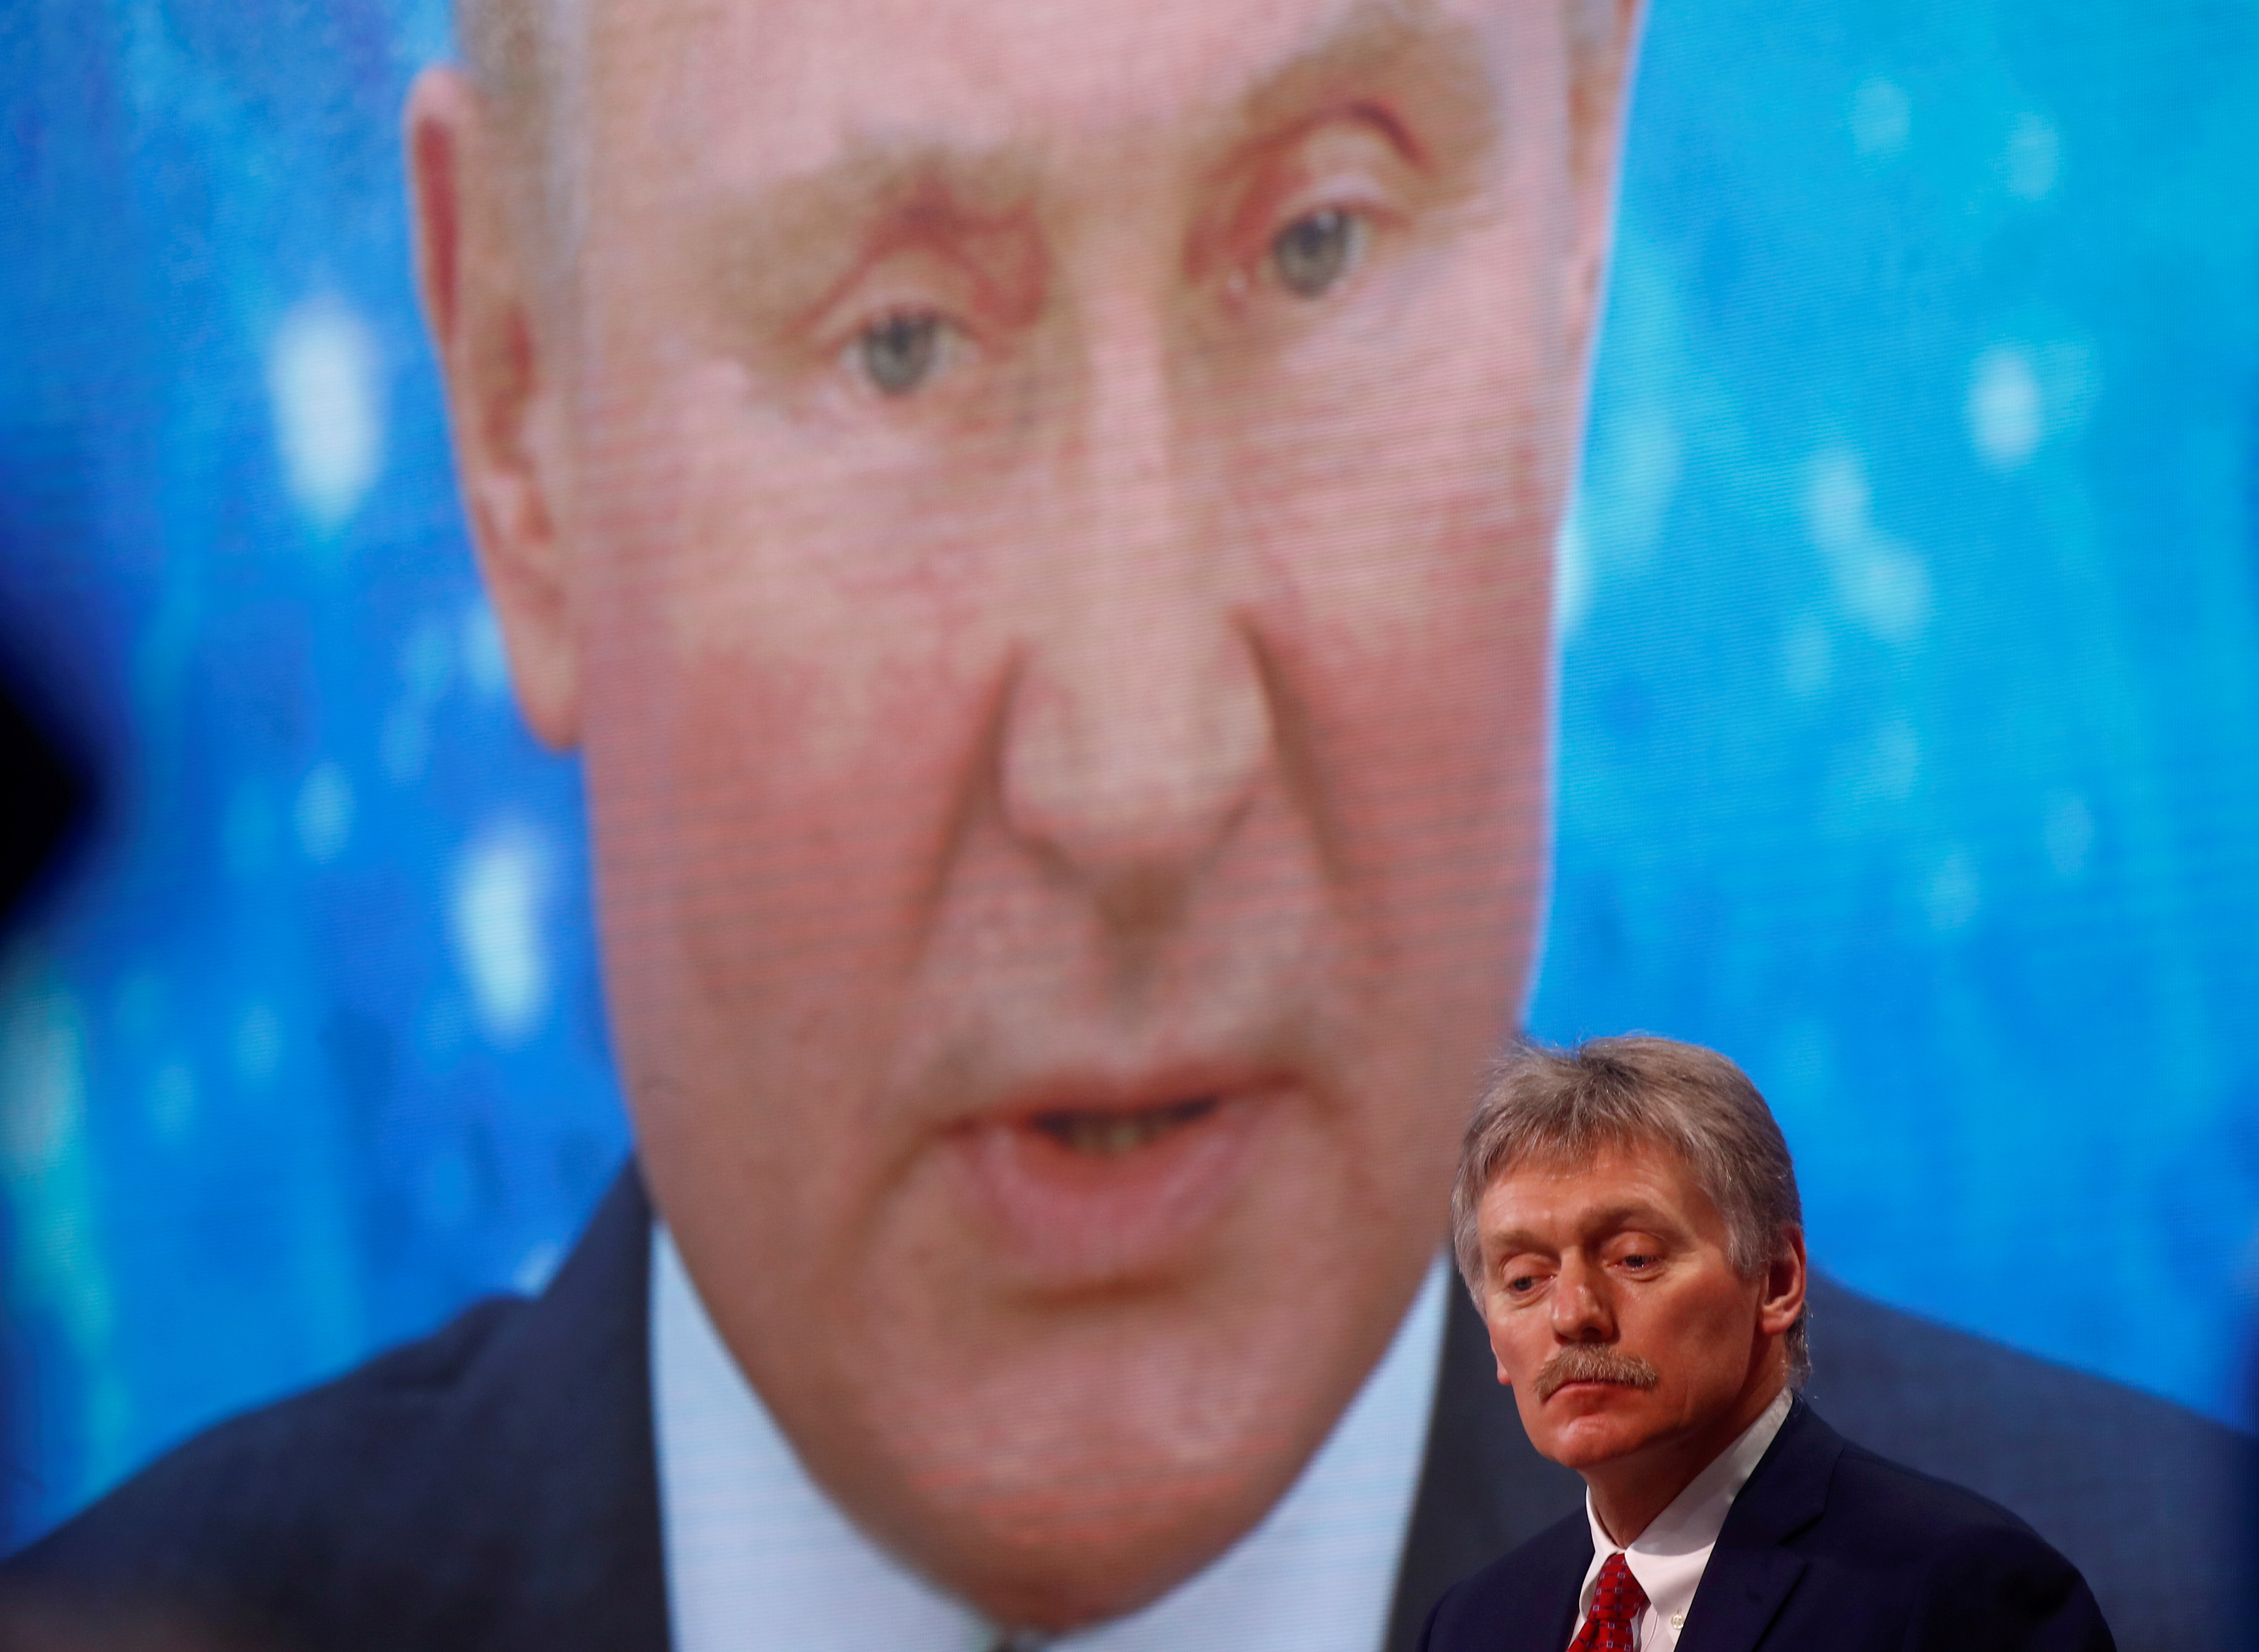 Kremlin spokesman Dmitry Peskov sits in front of an electronic screen during Russian President Vladimir Putin's annual news conference at the end of the year, held online in video conferencing mode, in Moscow, Russia on December 17, 2020. REUTERS / Maxim Shemetov / File Photo